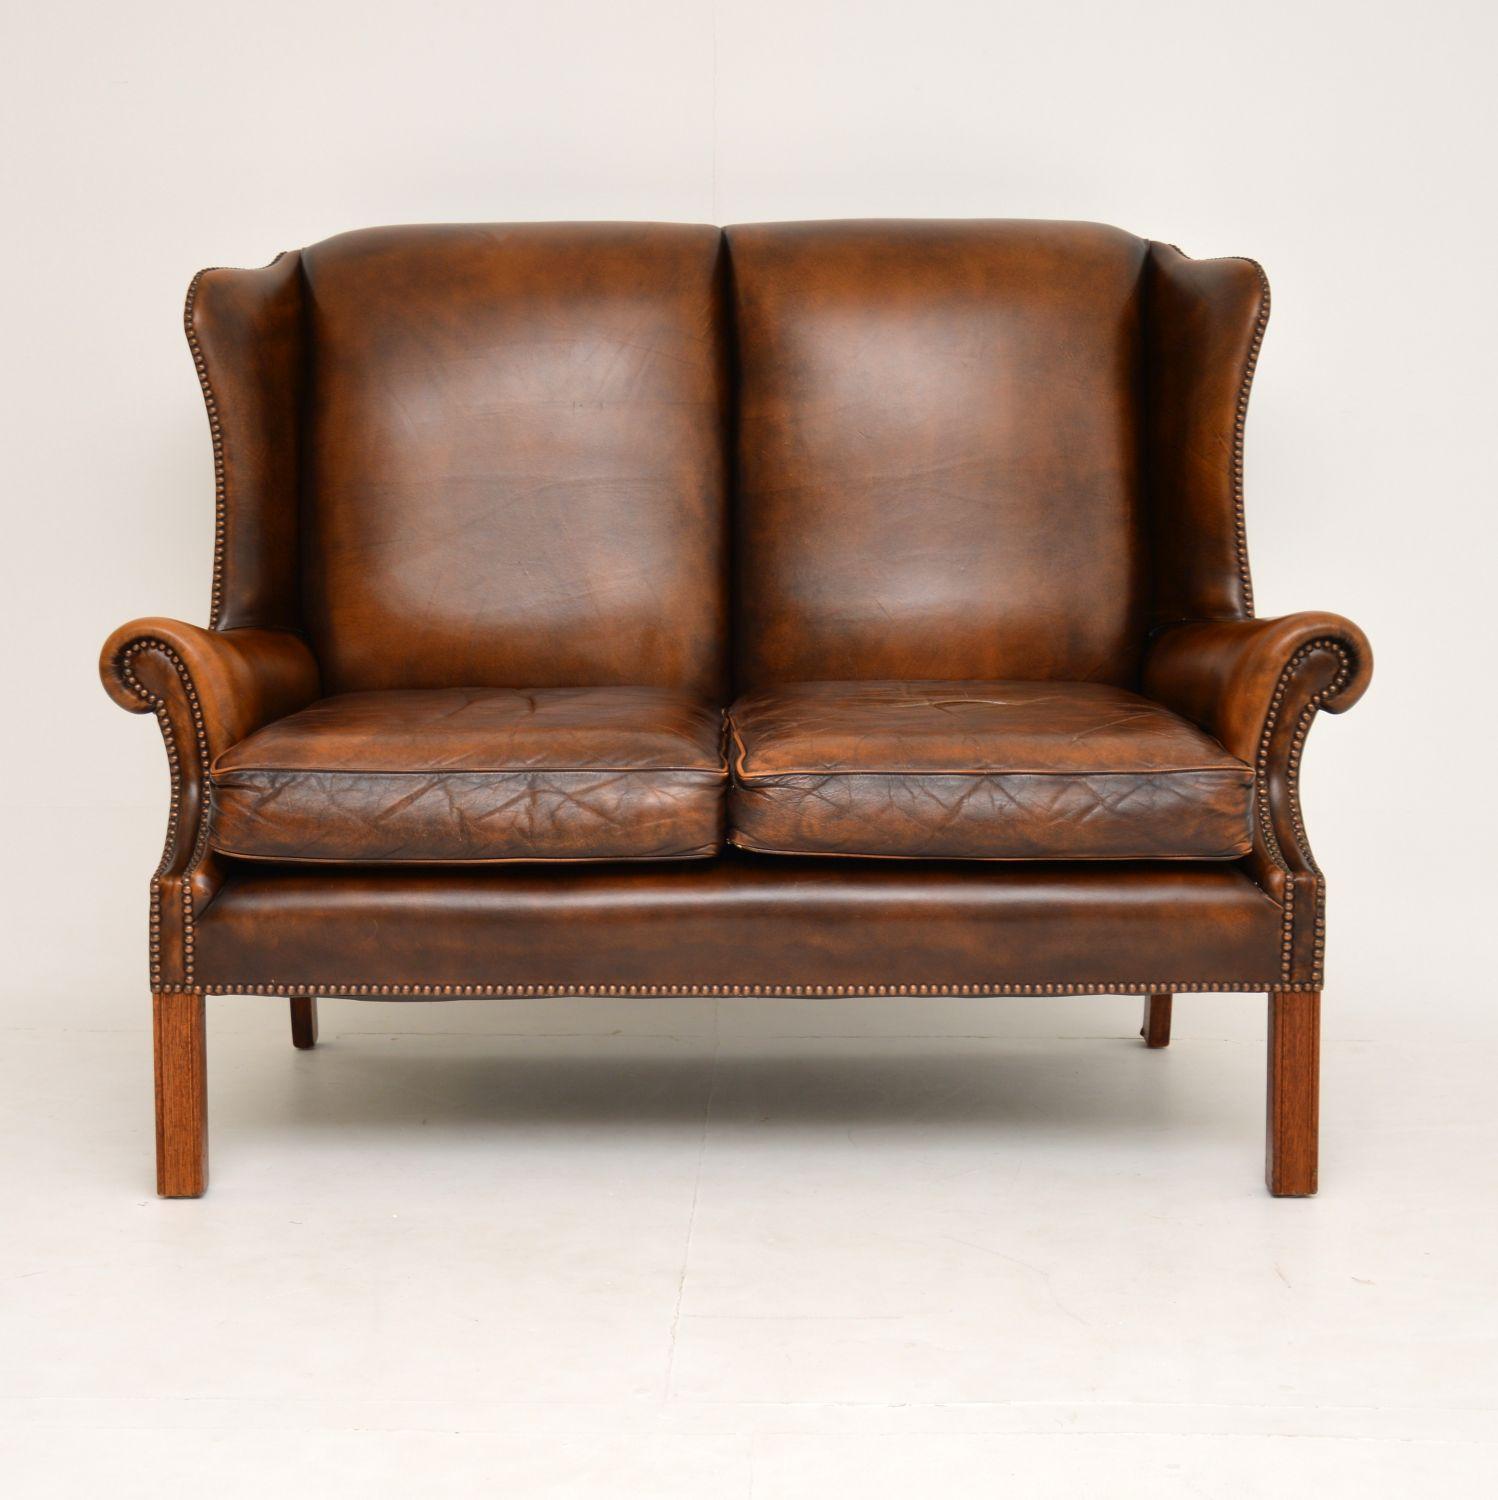 Very comfortable antique Georgian style two-eat wing back sofa in good original condition and dating from circa 1960s period.

The color of the leather has naturally worn and faded with use. However – There are no tears, splits or holes and this